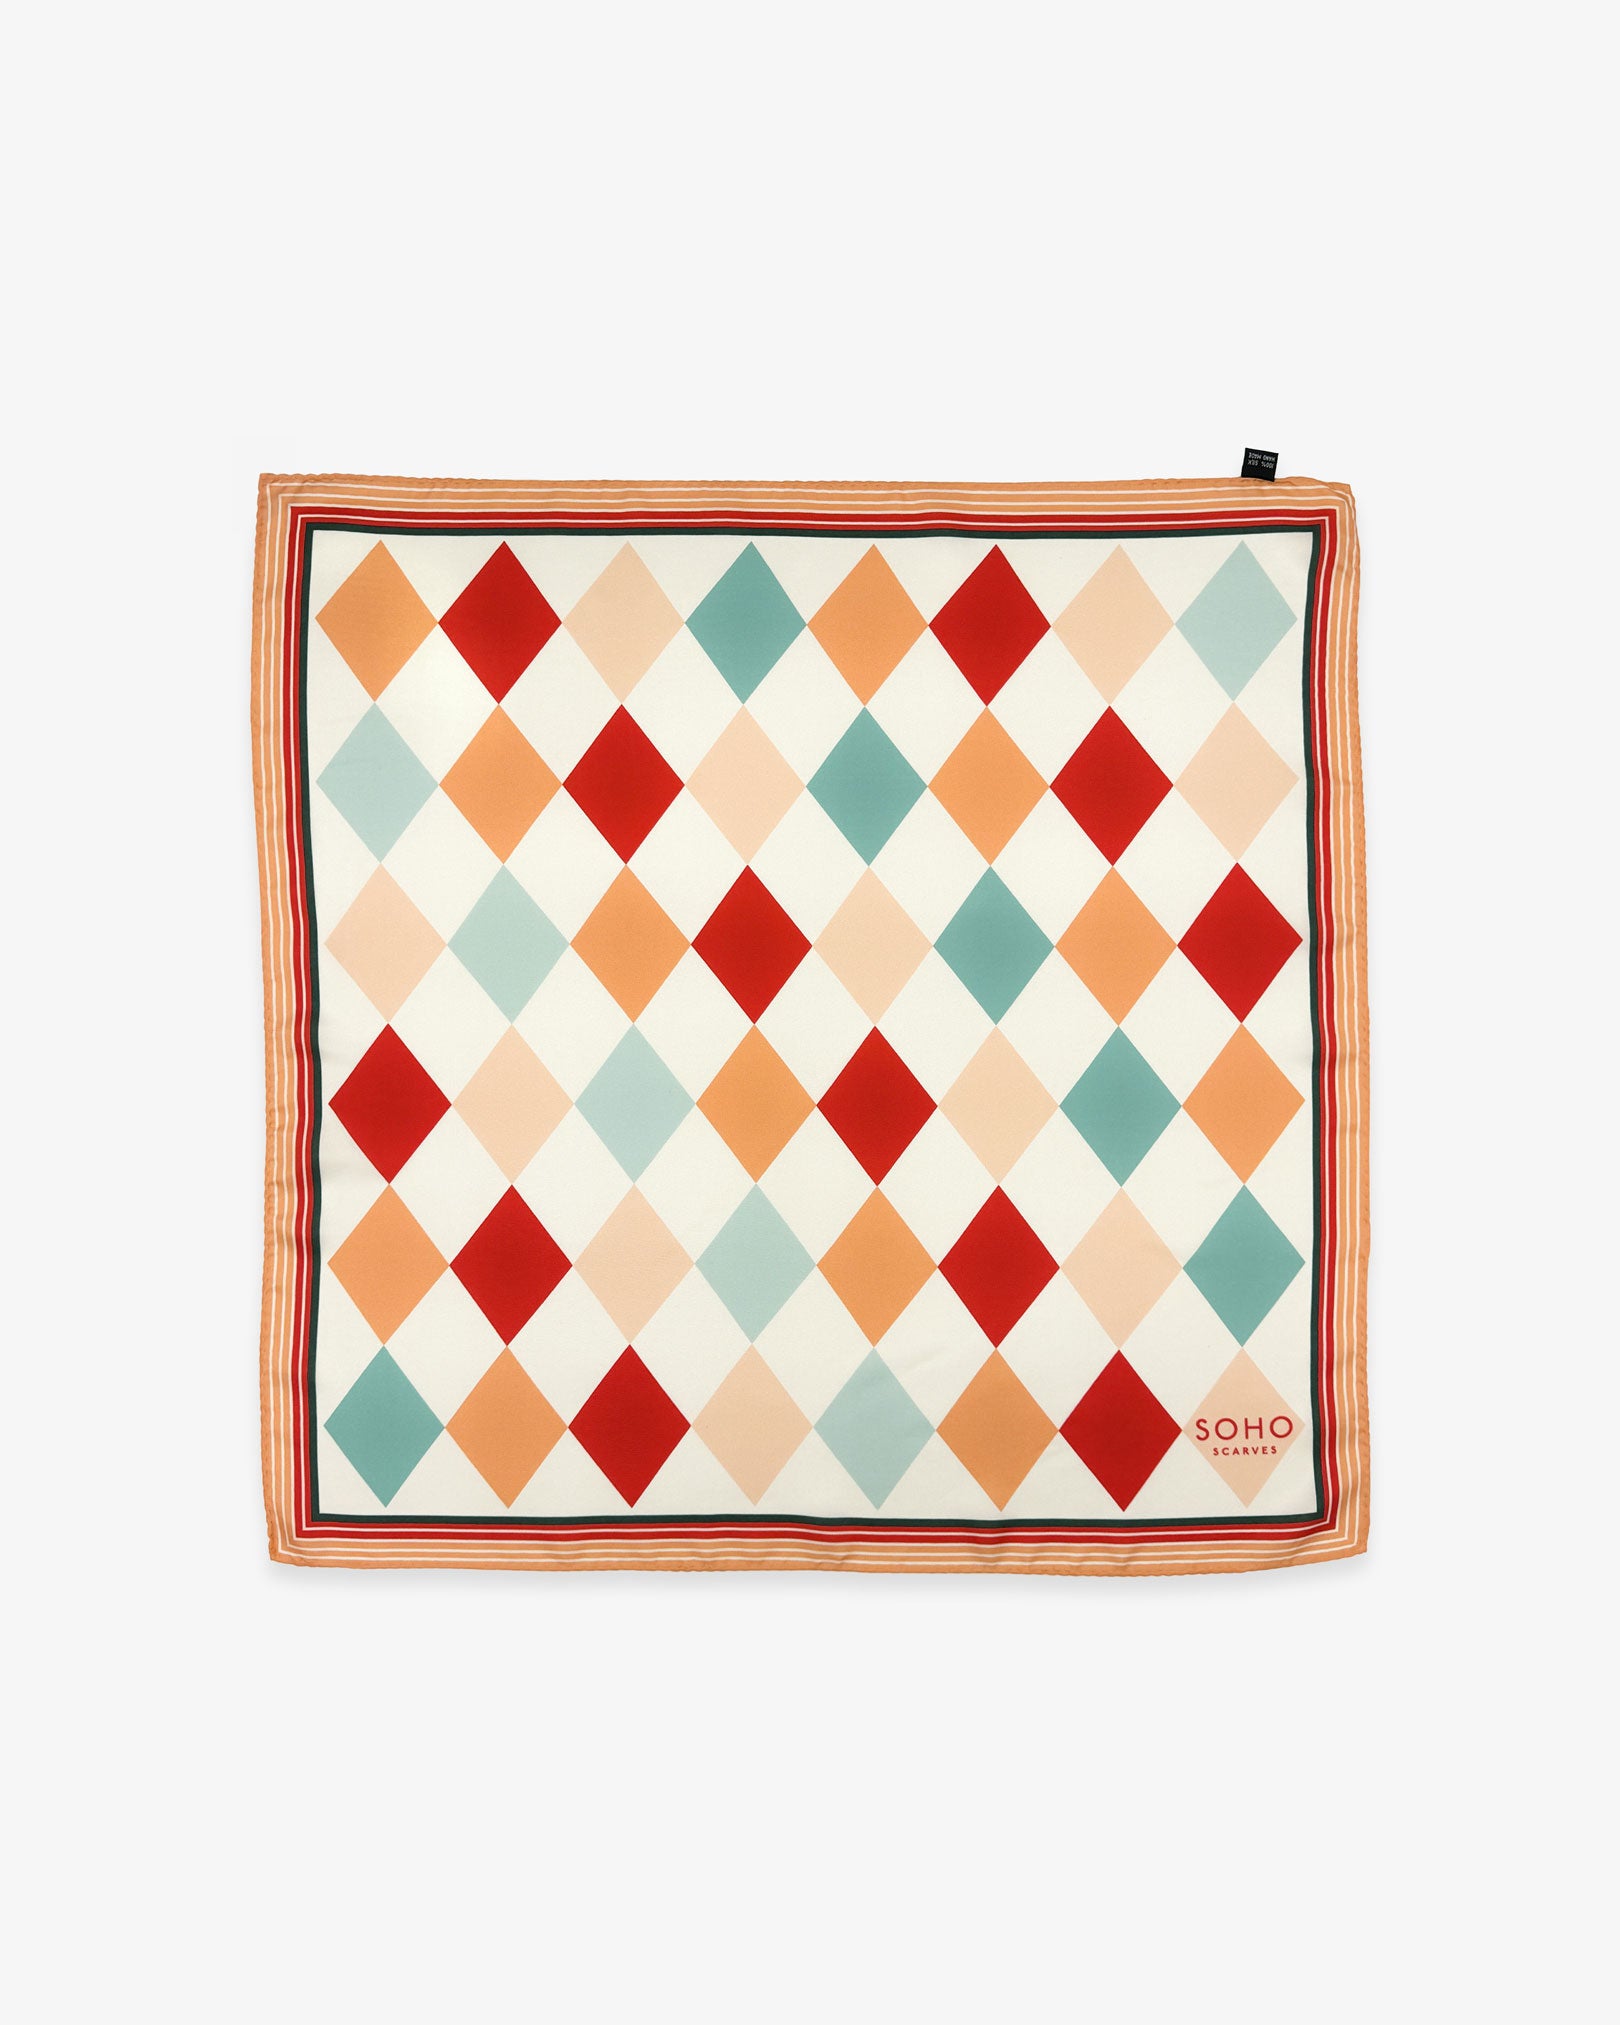 Fully unfolded 'Diamonds' silk neckerchief, showing the teal, red, orange and pink diamond repeat pattern with a concentric orange and red border.